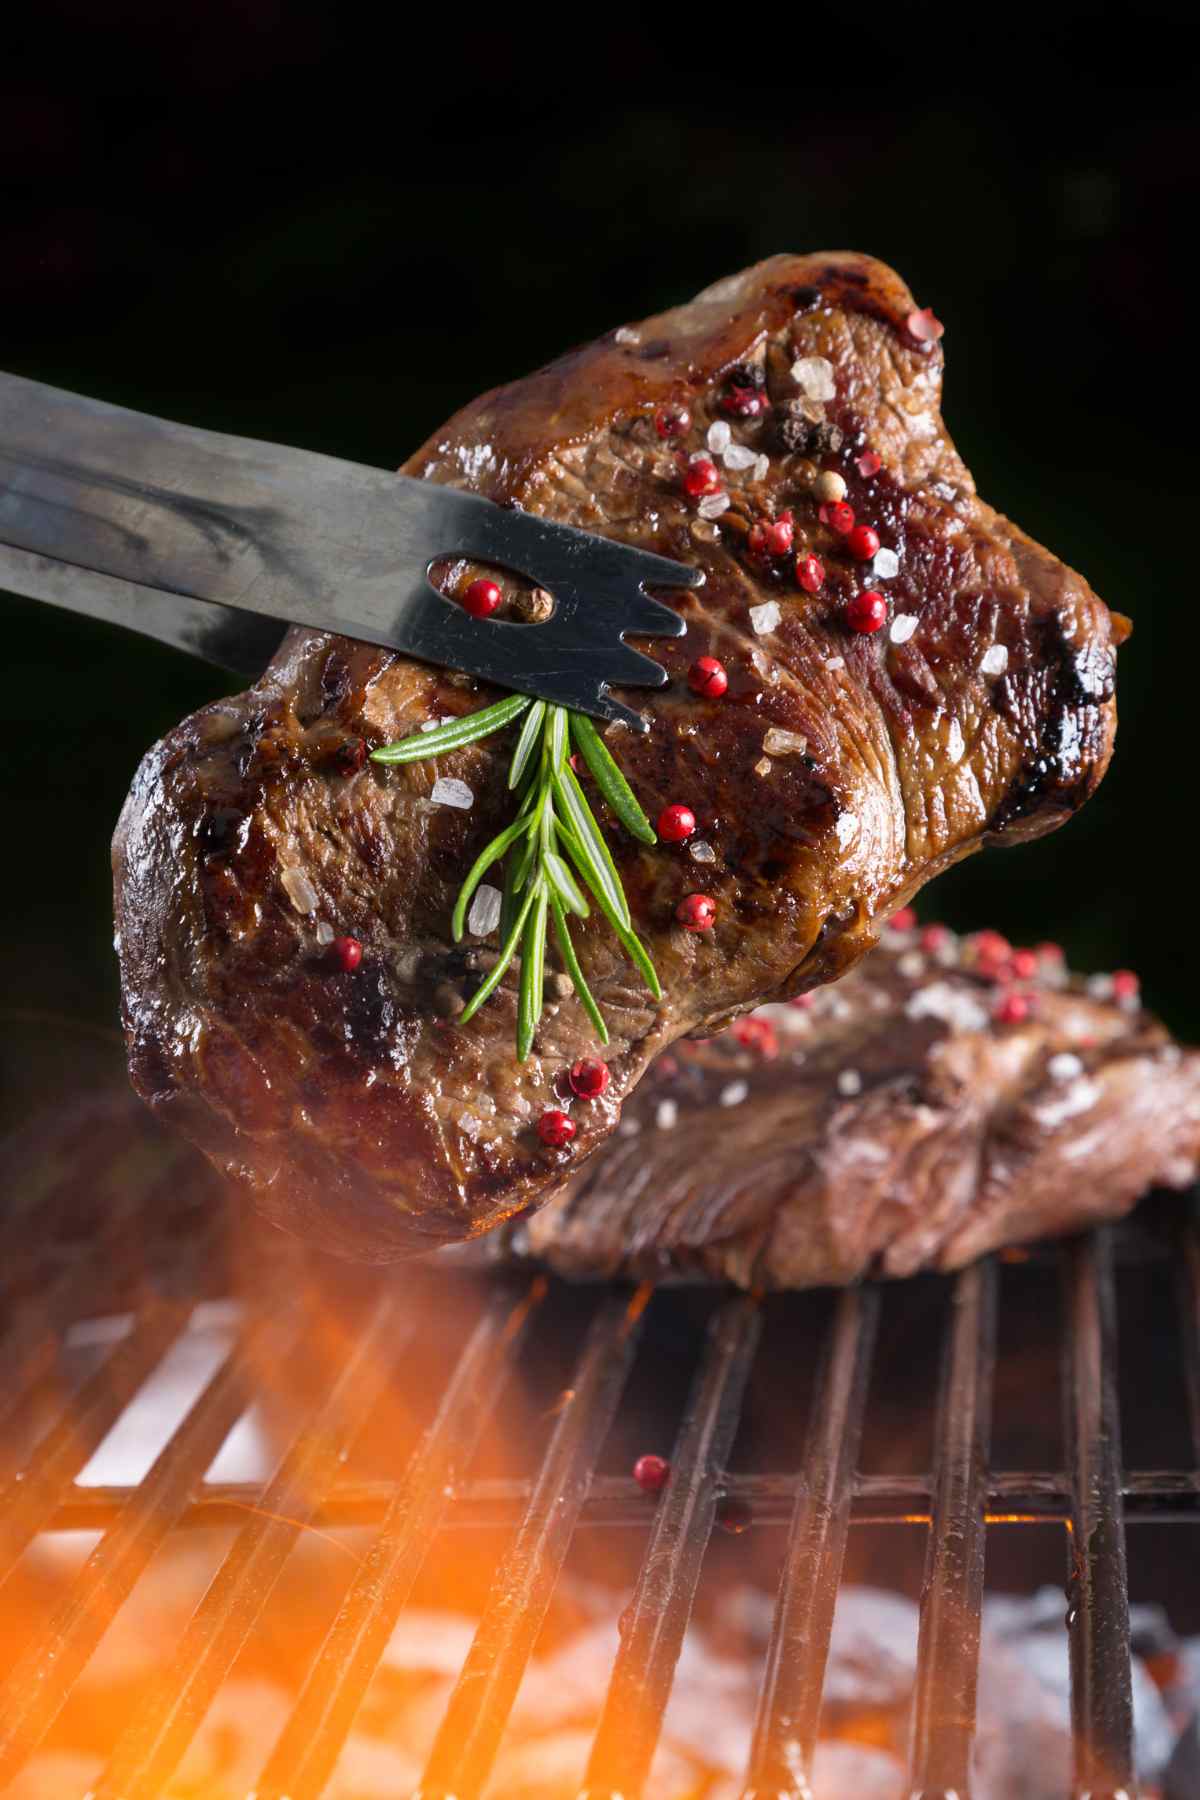 When it comes to grilling, many of us are familiar with two main types of grills: gas and charcoal. Each has its unique advantages and flavor profiles, but what if you want the best of both worlds? Can you use charcoal in a gas grill?